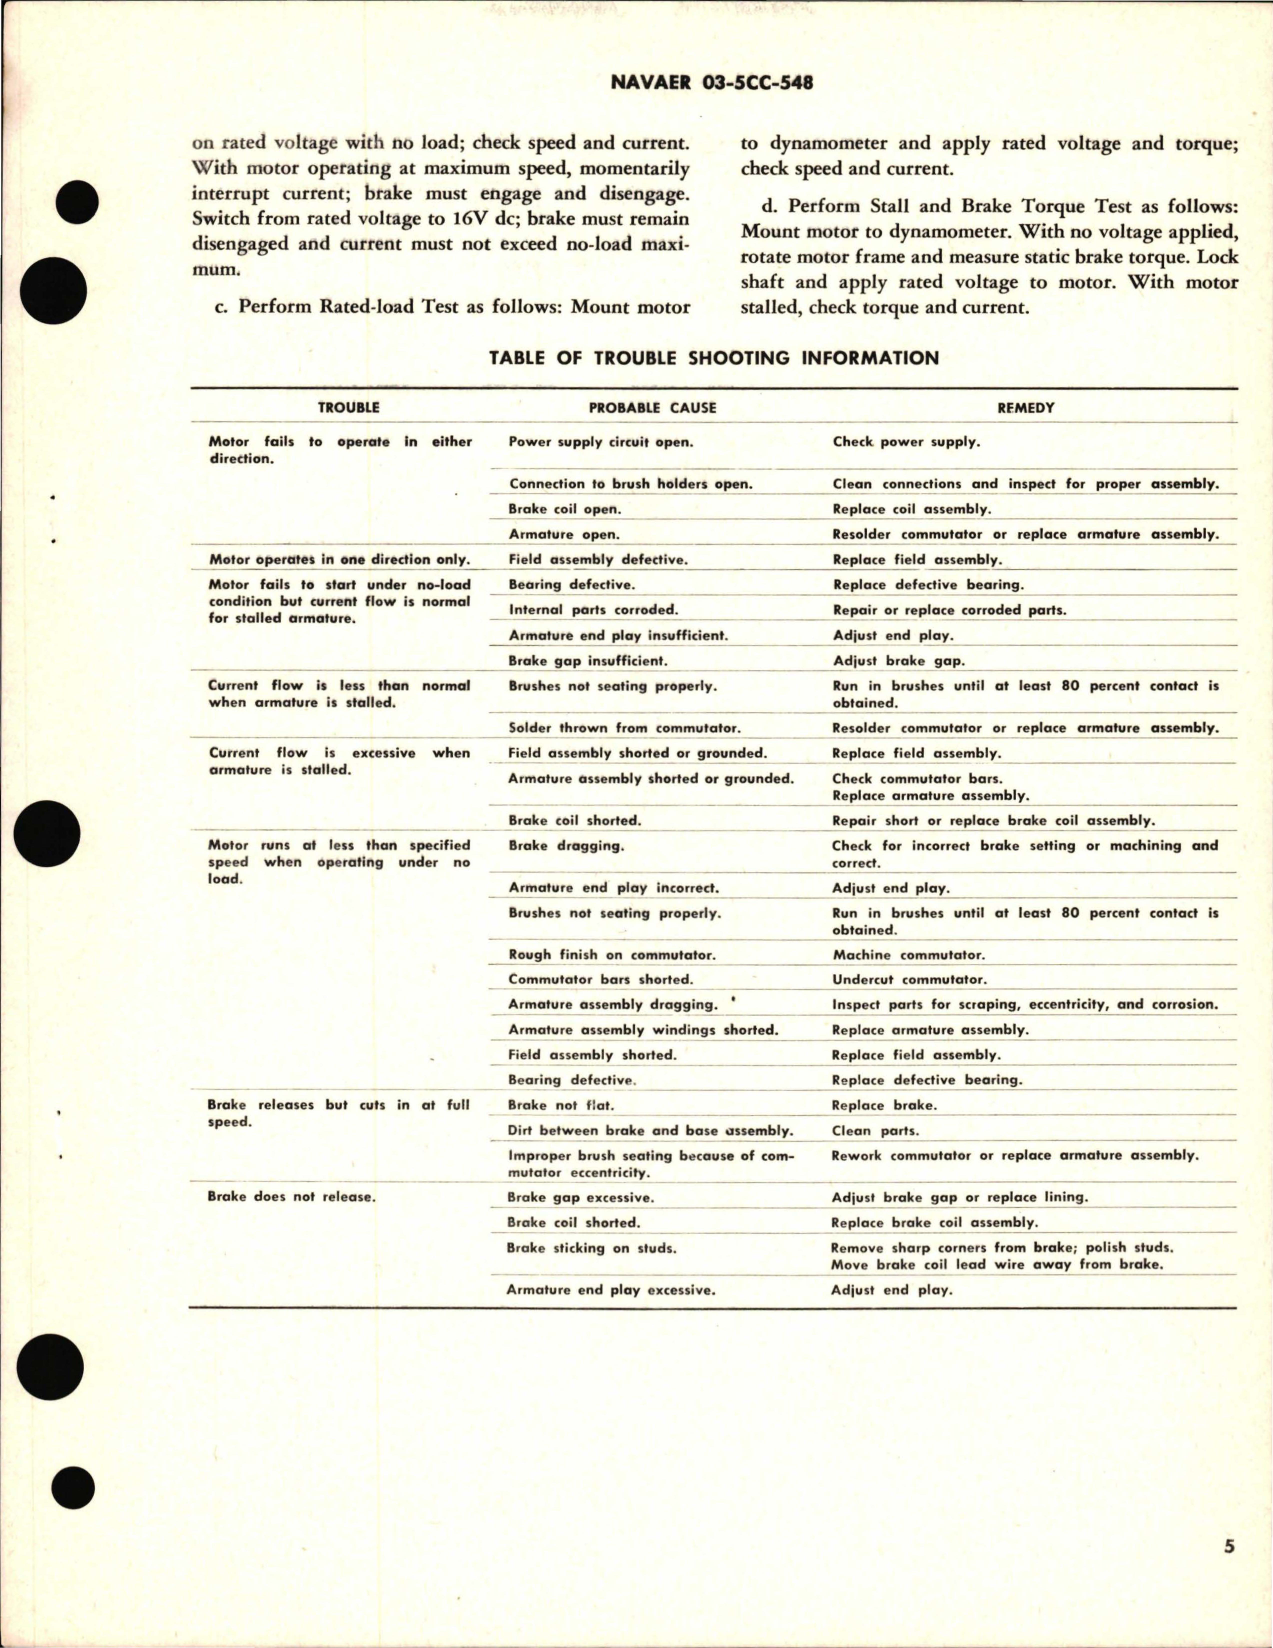 Sample page 5 from AirCorps Library document: Overhaul Instructions with Parts Breakdown for Direct Current Motor - Part 26968